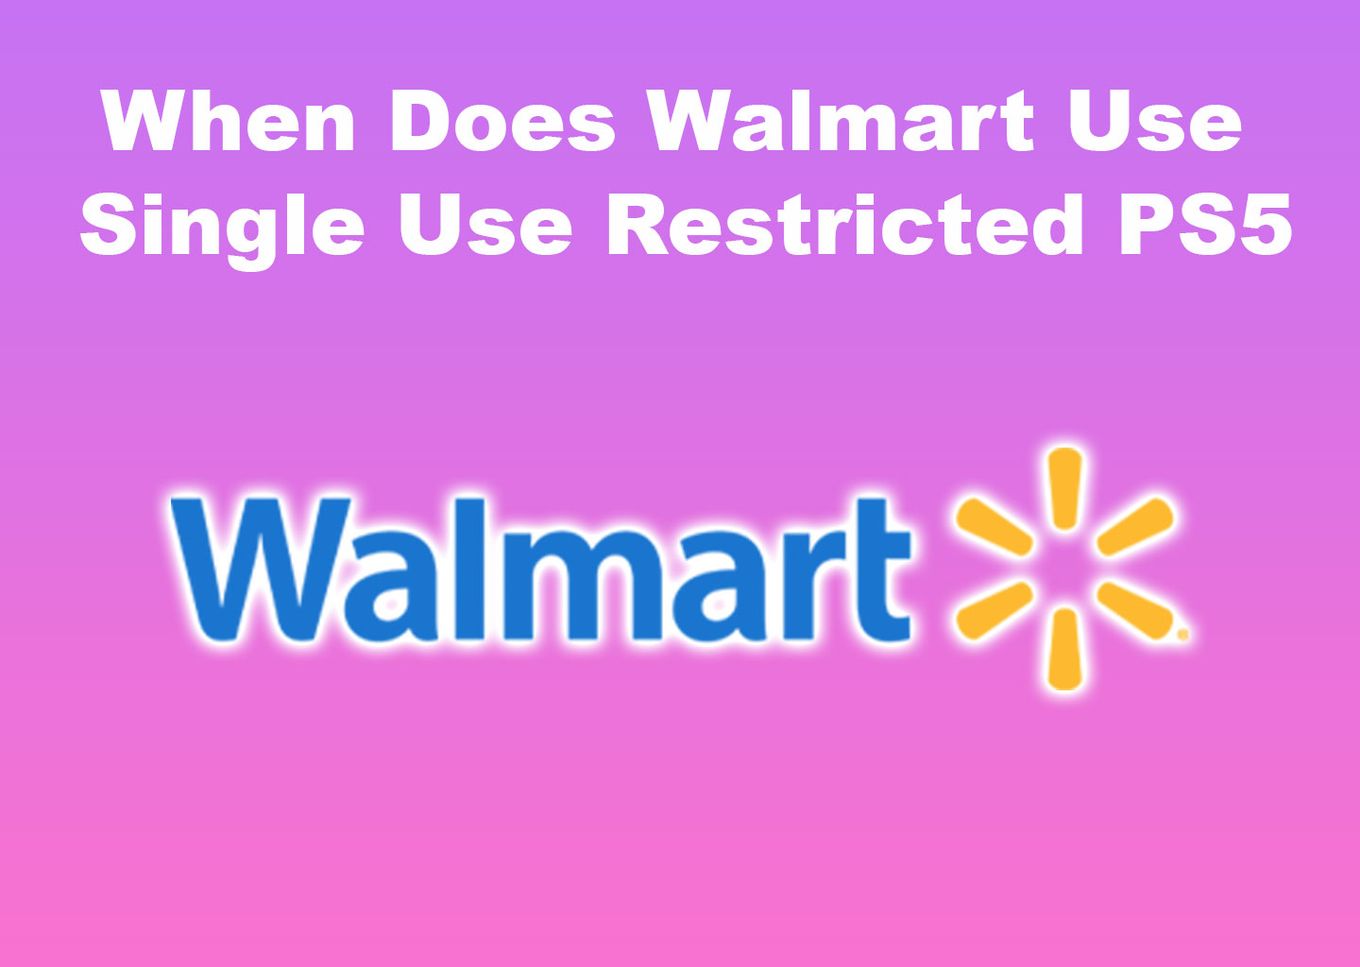 When Does Walmart Use Single Use Restricted PS5